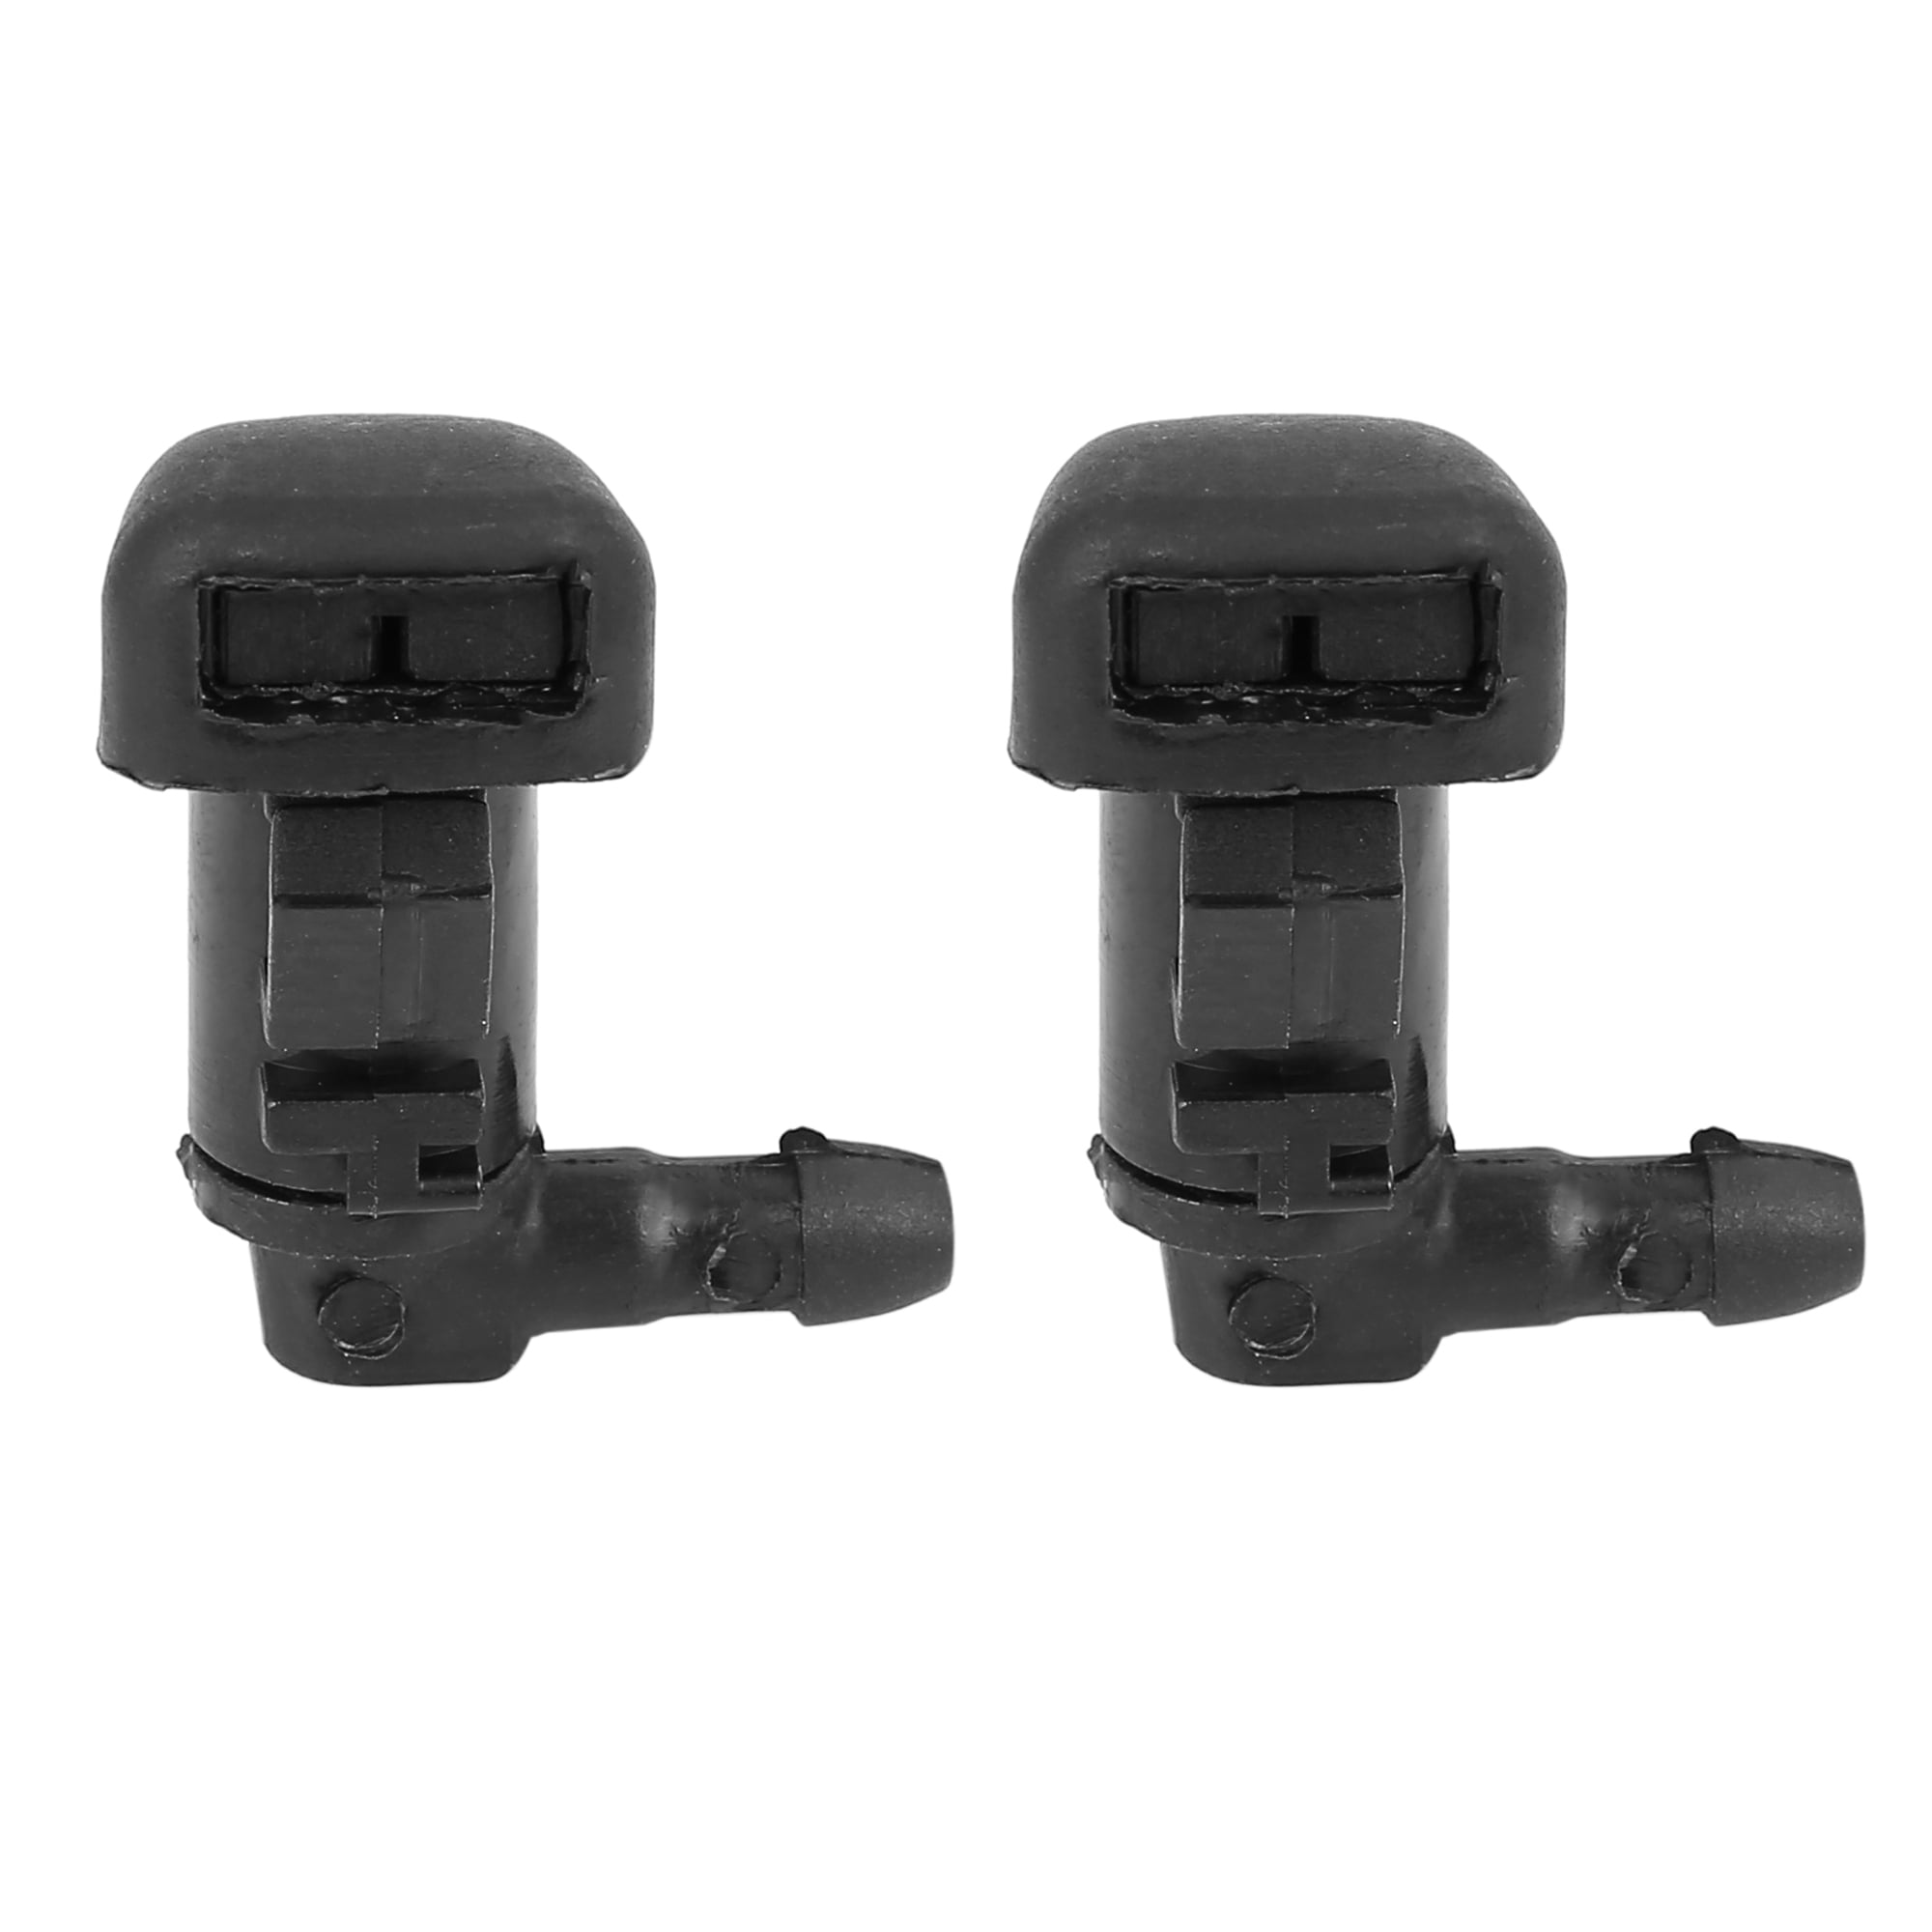 2 Pack Windshield Washer Nozzle for 2008-2012 Ford Fusion Lincoln MKZ 2008-2011 Mercury Milan 8E5Z17603A 